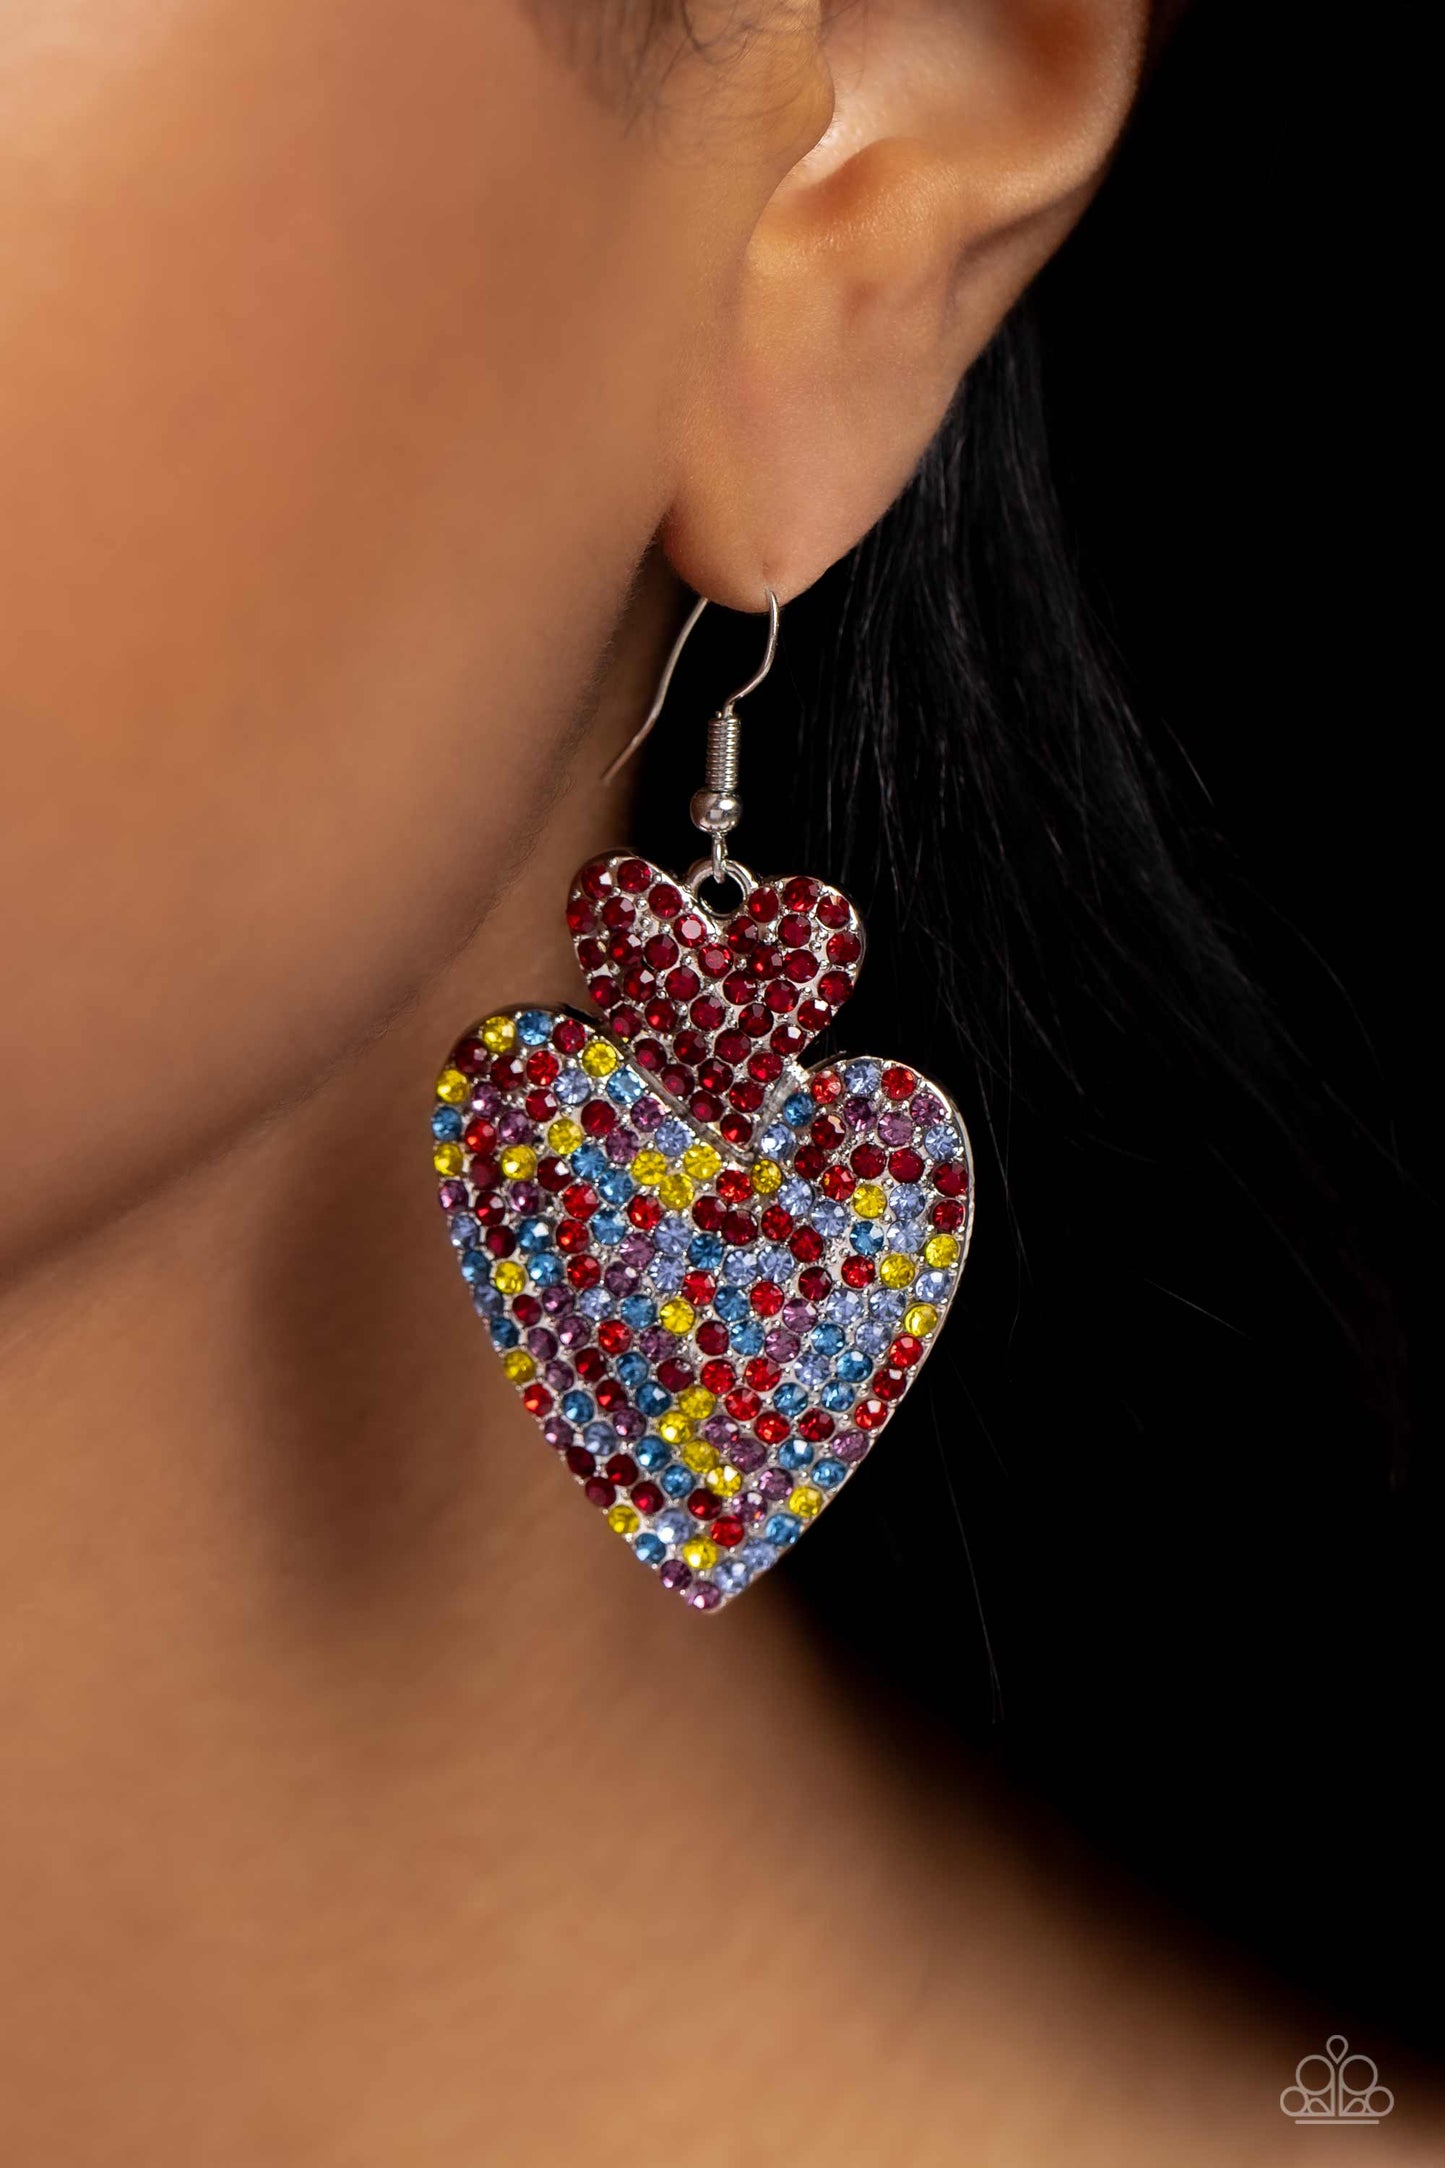 Flirting Flourish Red Heart Earring - Paparazzi Accessories  Embossed in dainty rhinestones, a red rhinestone-covered silver heart frame delicately links with a larger silver heart frame featuring red, light red, blue, yellow, and pink rhinestones for a flirtatiously vibrant look. Earring attaches to a standard fishhook fitting.  Sold as one pair of earrings.  P5ST-RDXX-024XX